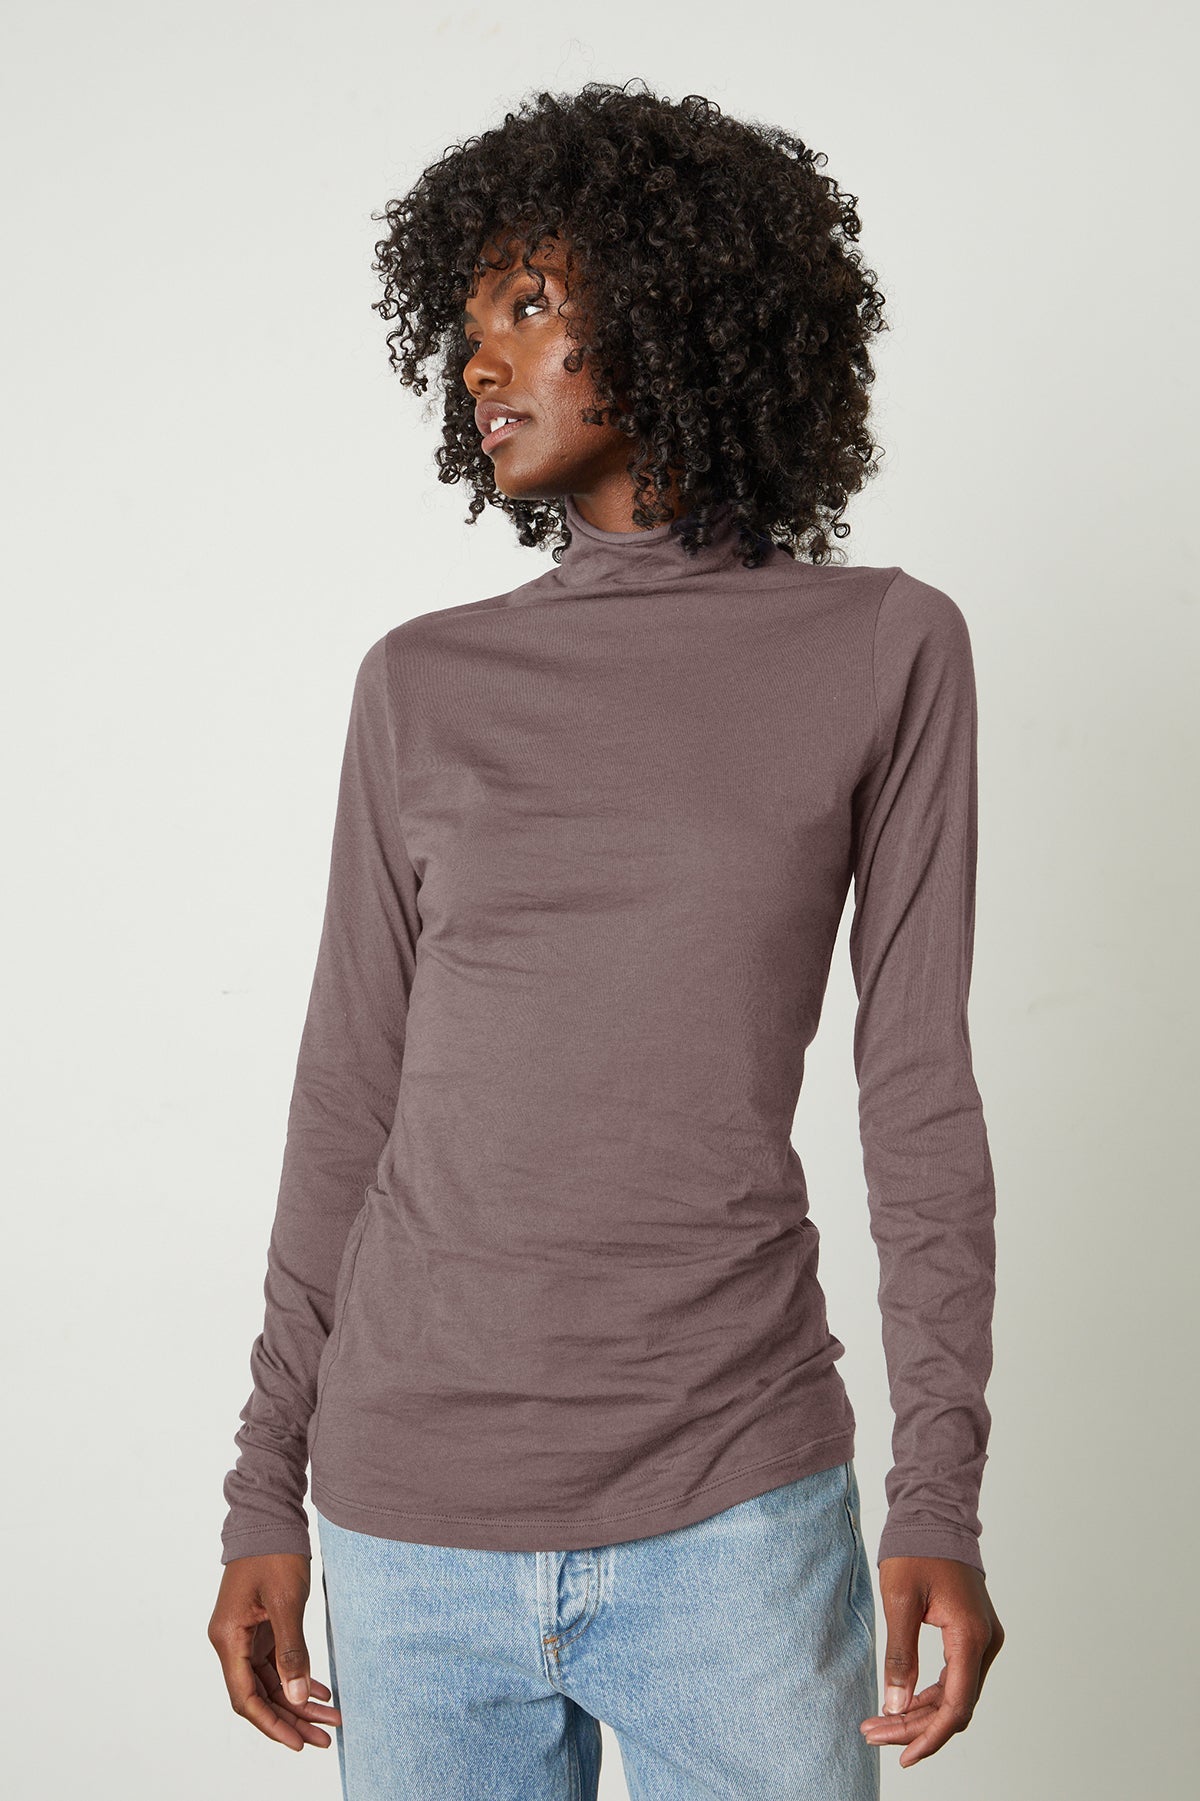   Talisia Gauzy Whisper Fitted Mock Neck Tee in Fawn with light blue denim front 